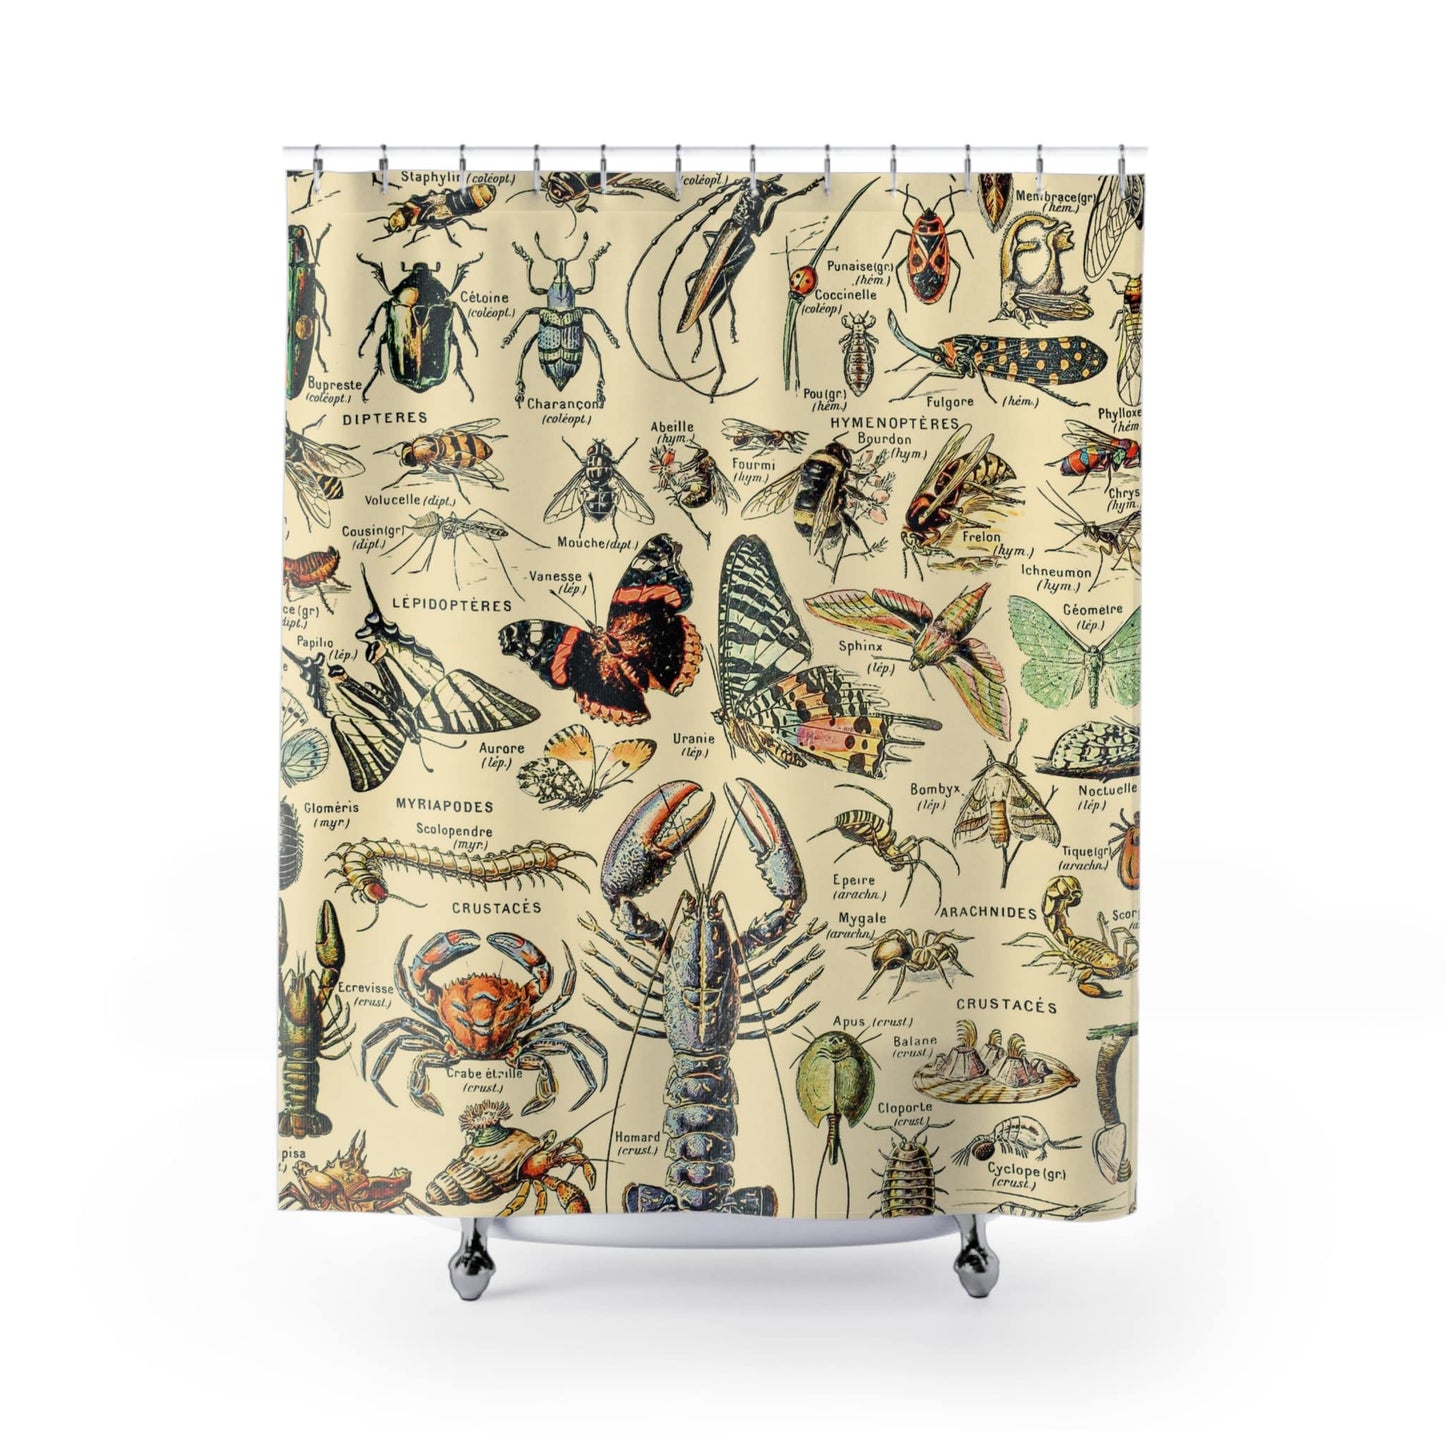 Cool Insects Shower Curtain with butterfly and bugs design, nature-inspired bathroom decor showcasing detailed insect art.